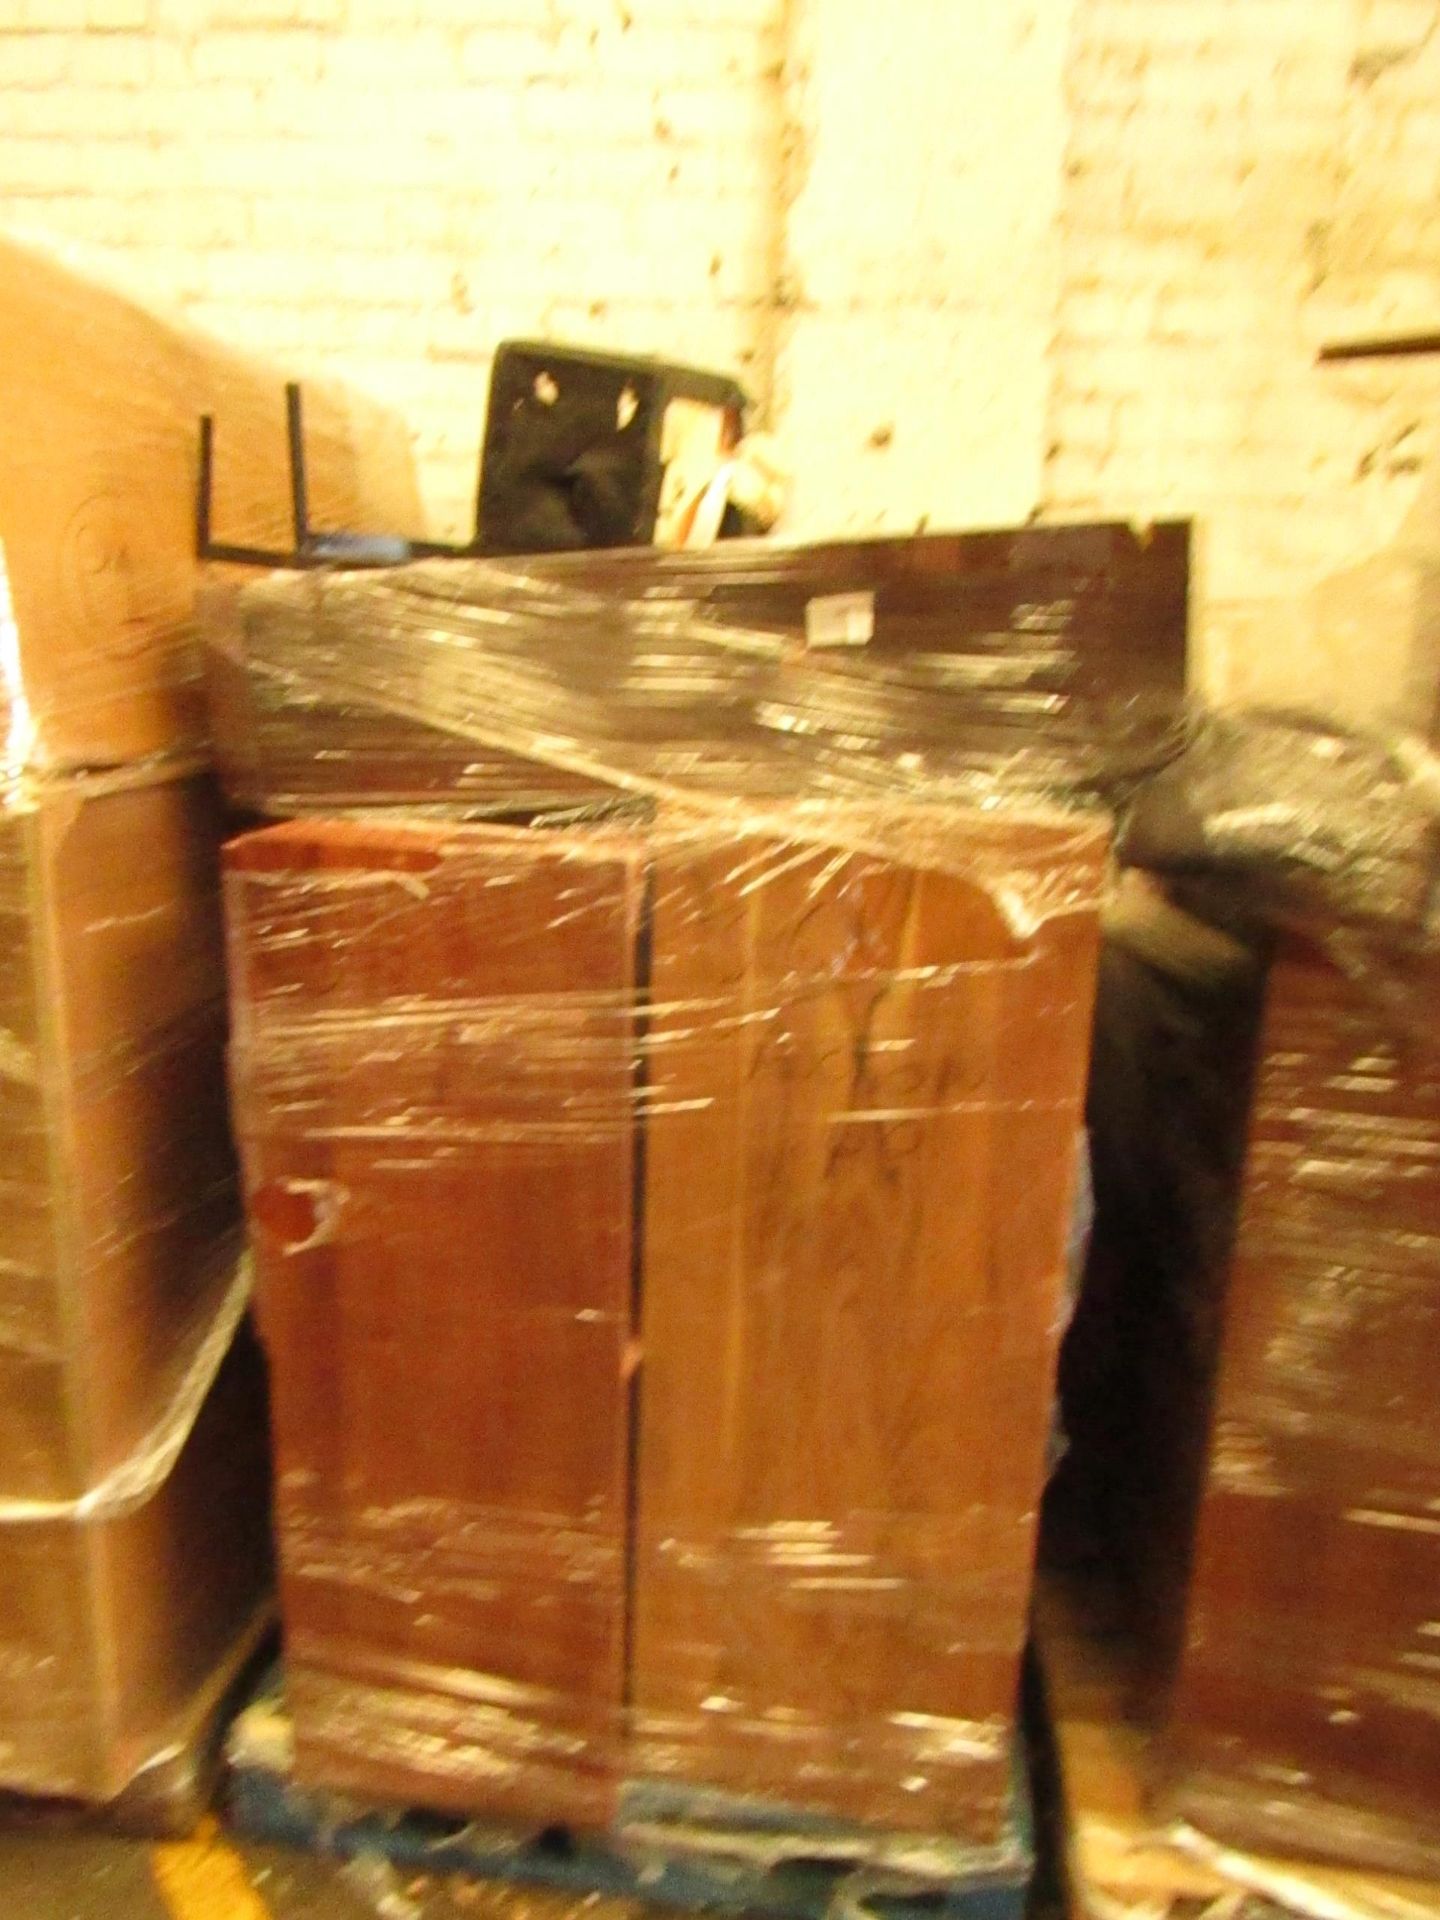 | 1x | PALLET OF SWOON B.E.R AND AWAITING PARTS AND POSSIBLY GRADED FURNITURE ITEMS WHICH COULD